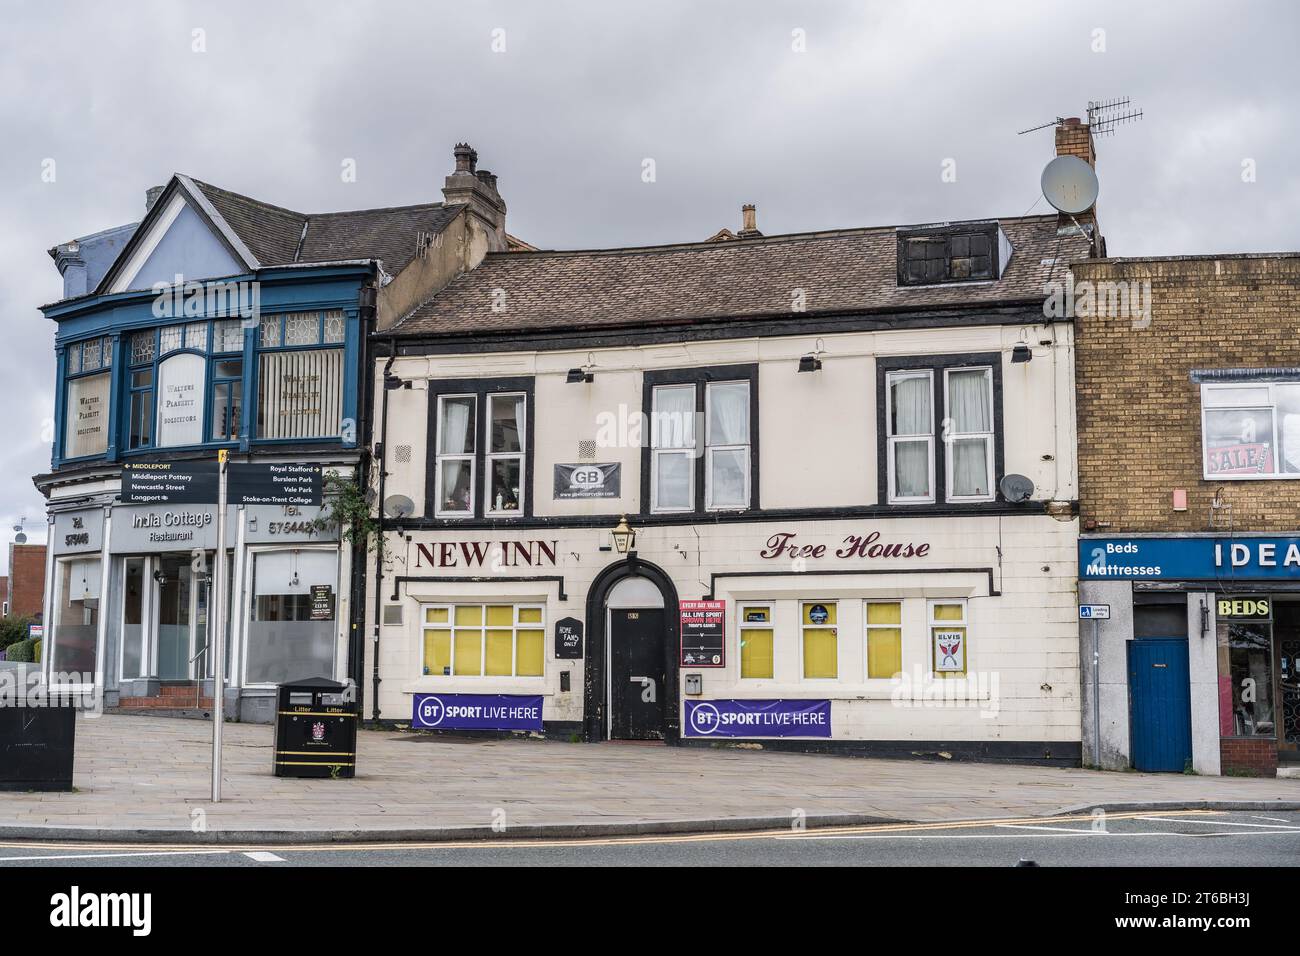 Burslem, Stoke on Trent, England, March 21st 2023. New Inn free house with India Cottage Restaurant on downtown street, editorial illustration. Stock Photo